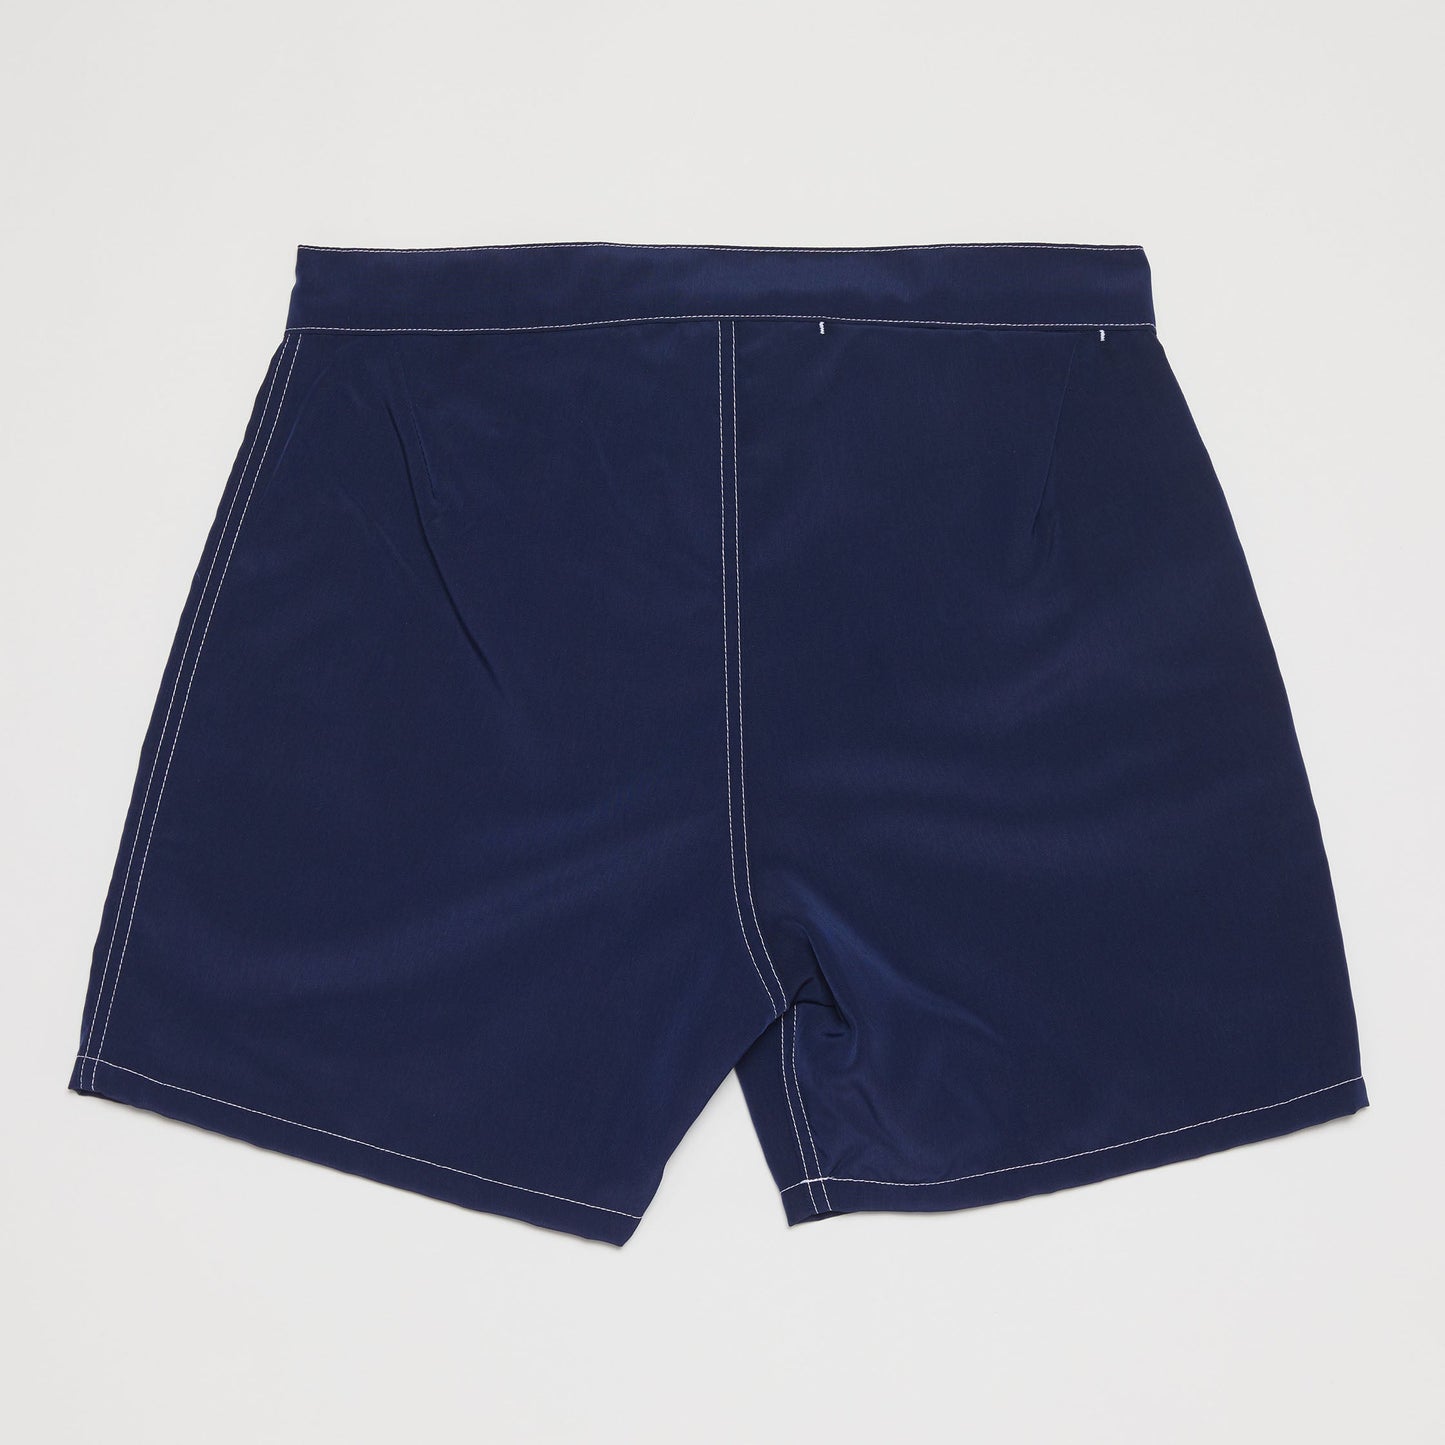 Solid Trunks (Navy)